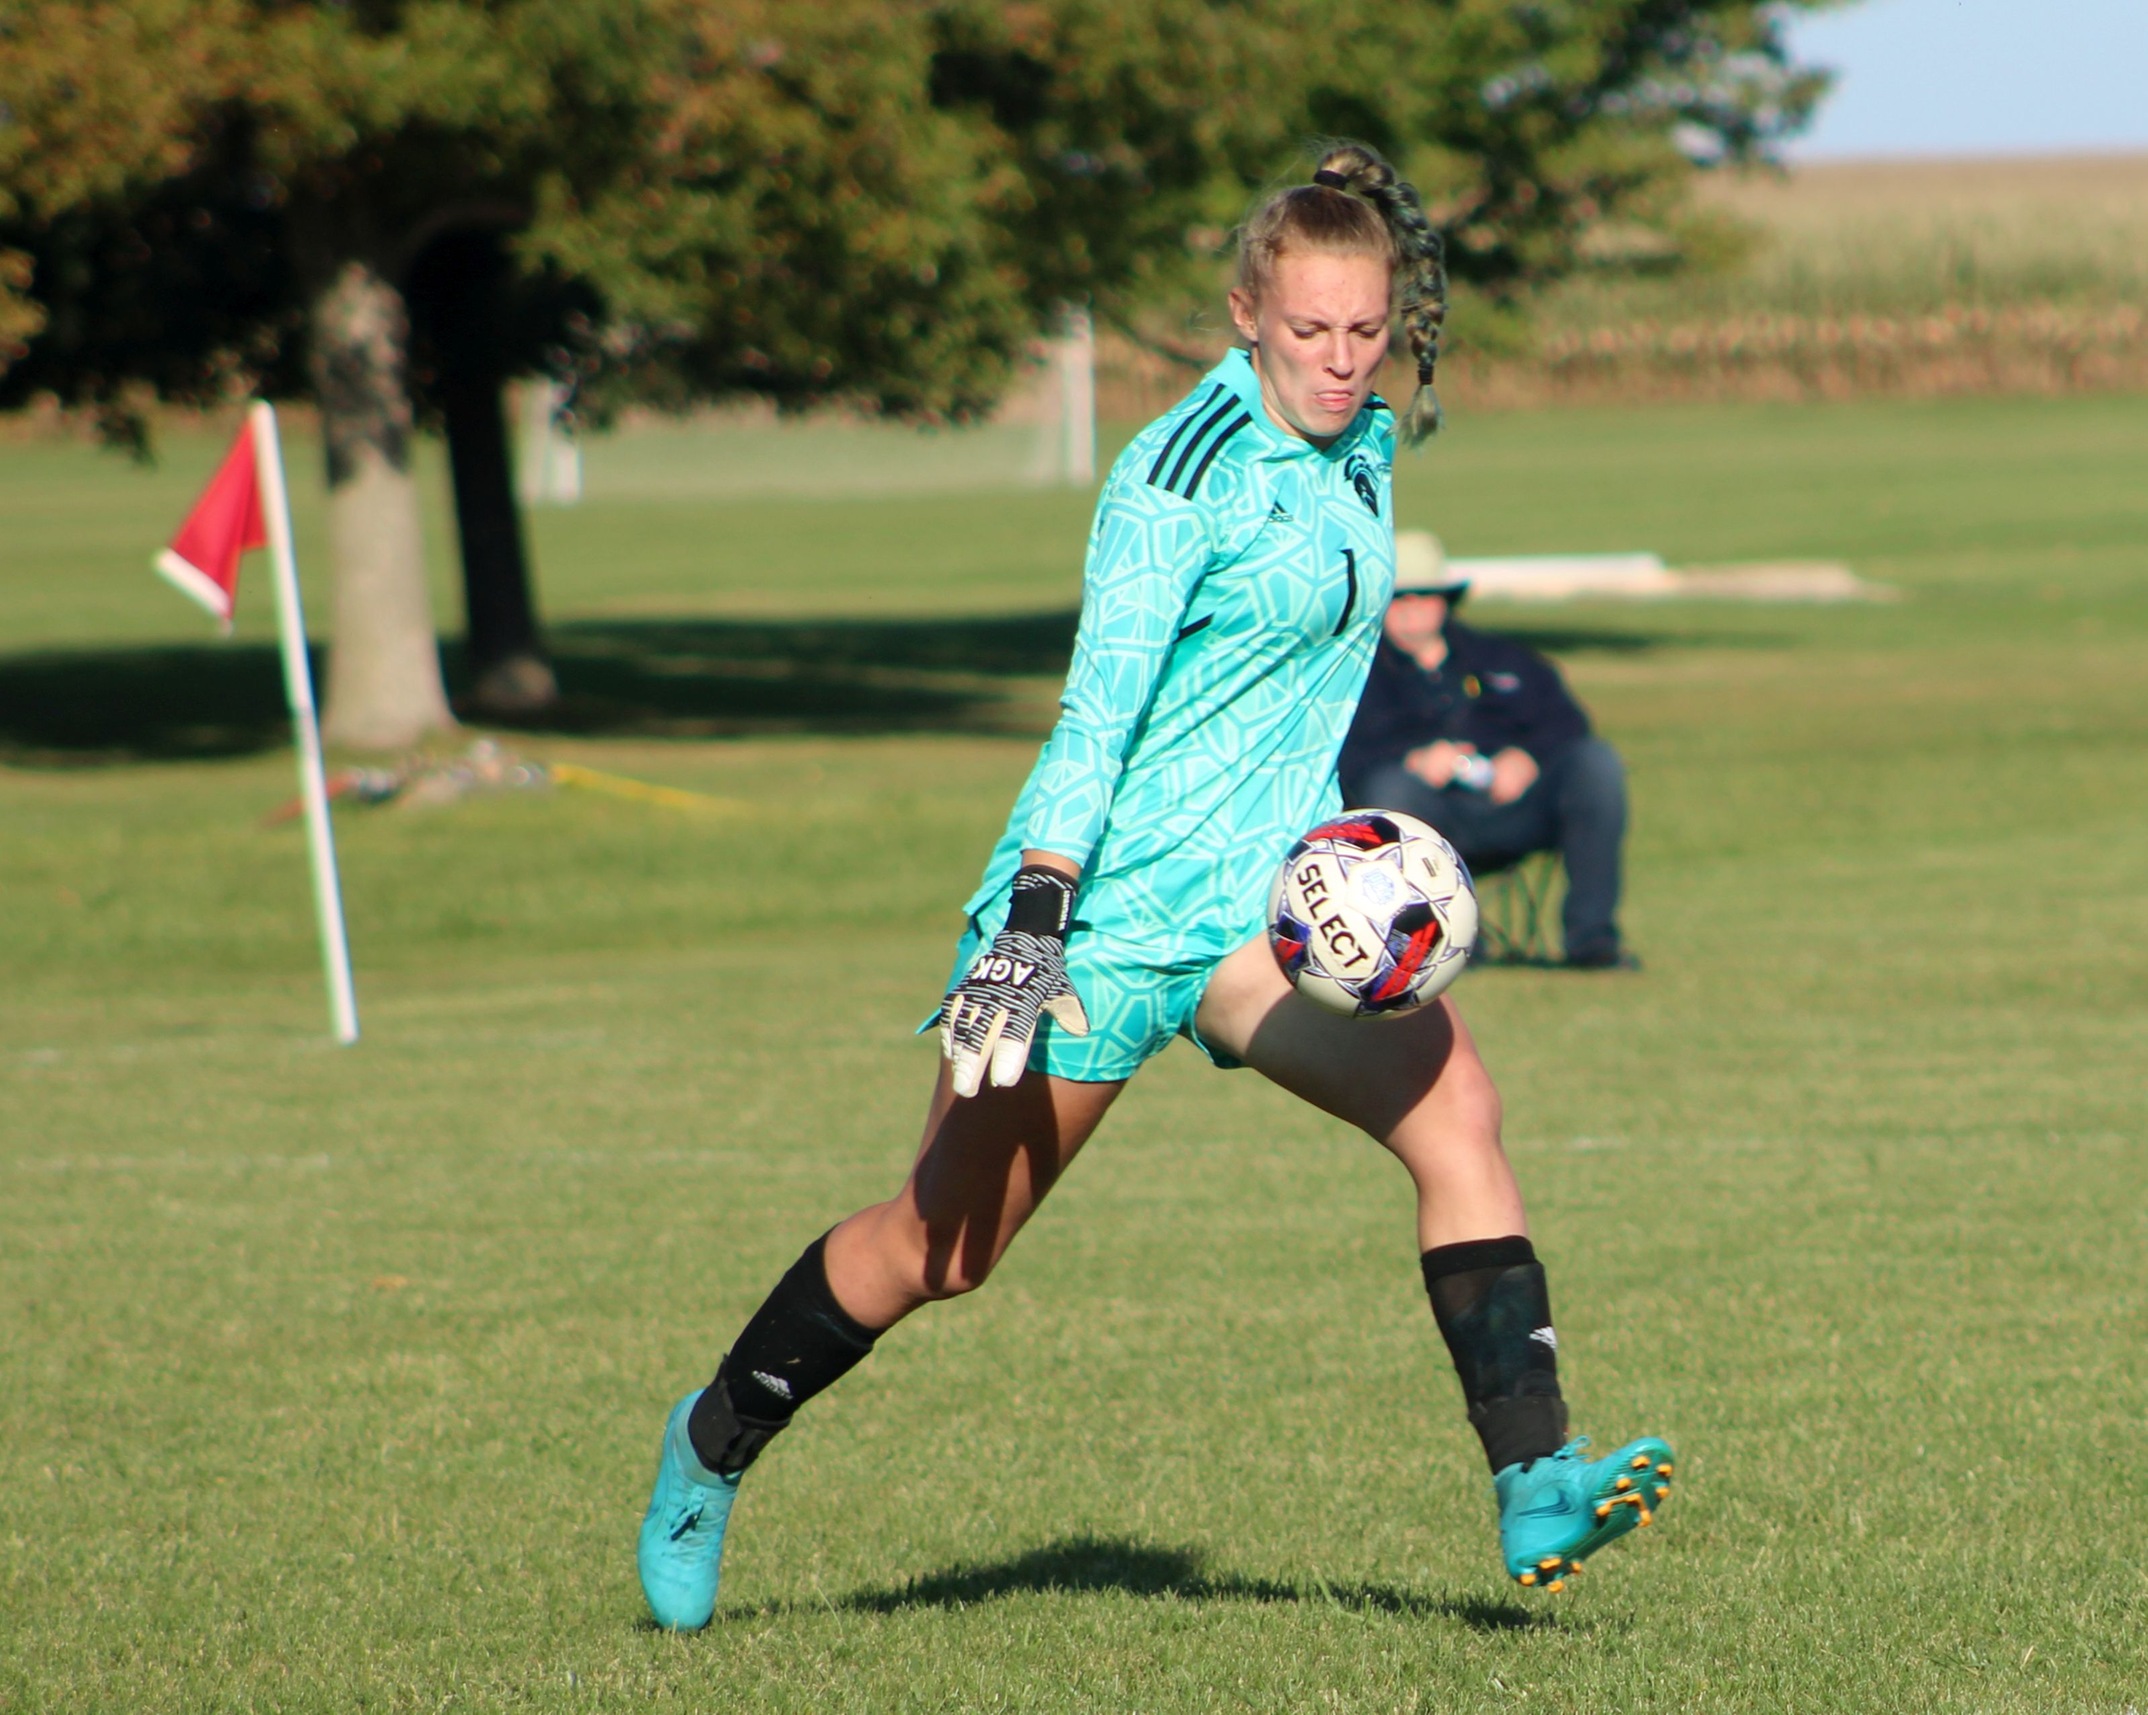 NIACC's Jada Westover was selected as the ICCAC Division II keeper of the week for the week of Sept. 19-25.